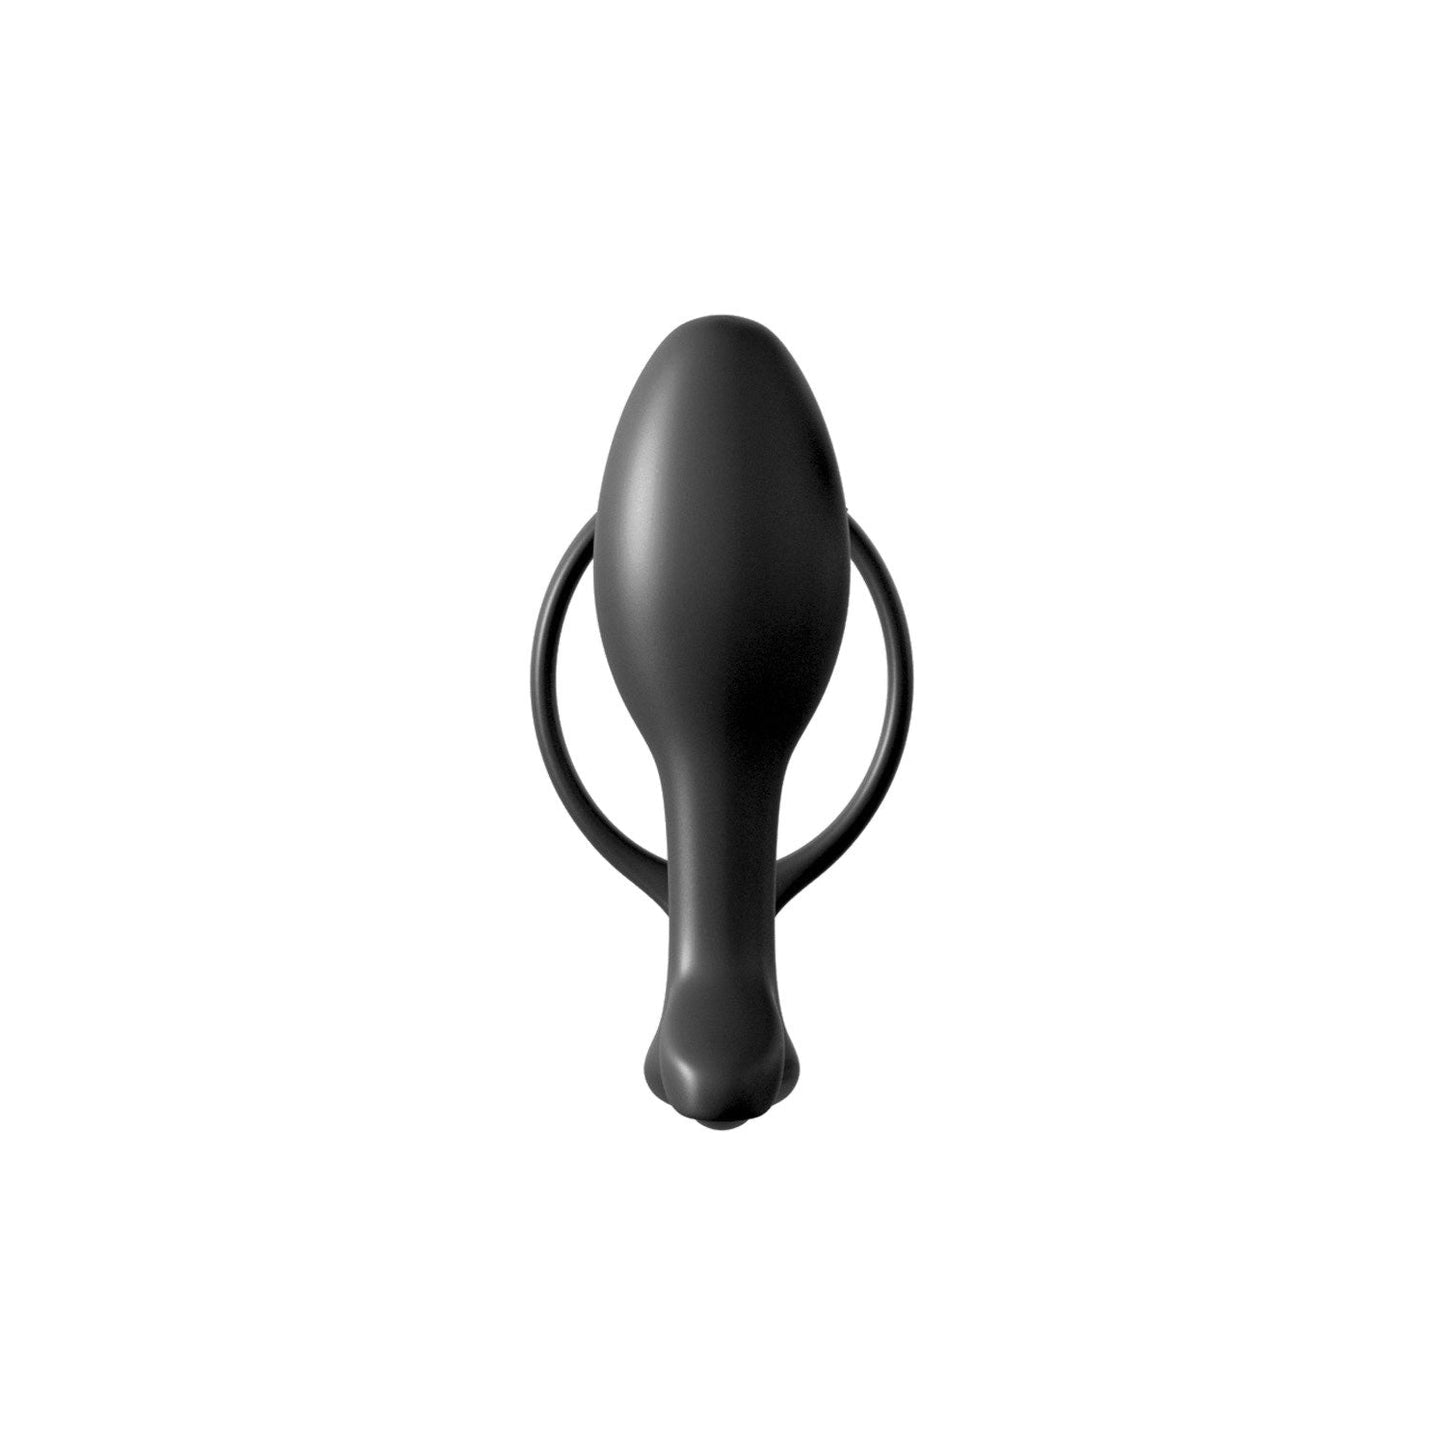 Ass-Gasm Cock Ring Beginners Plug - Black Cock Ring with Anal Plug